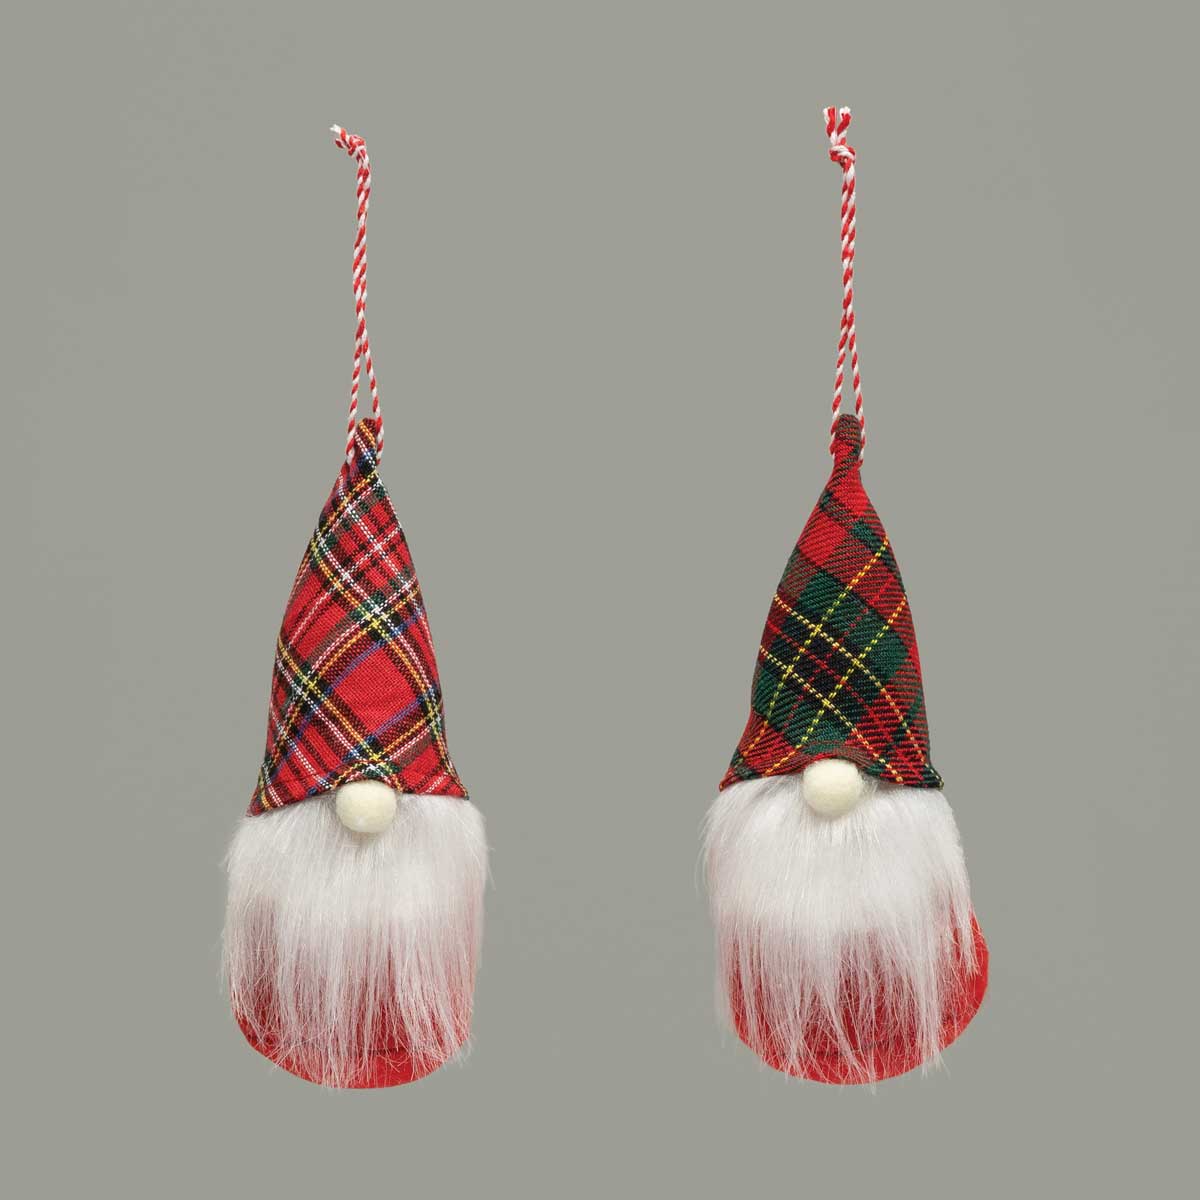 b50 MINI GNOME PLAID 2 ASSORTED RED 2.5IN X 6IN - Click Image to Close